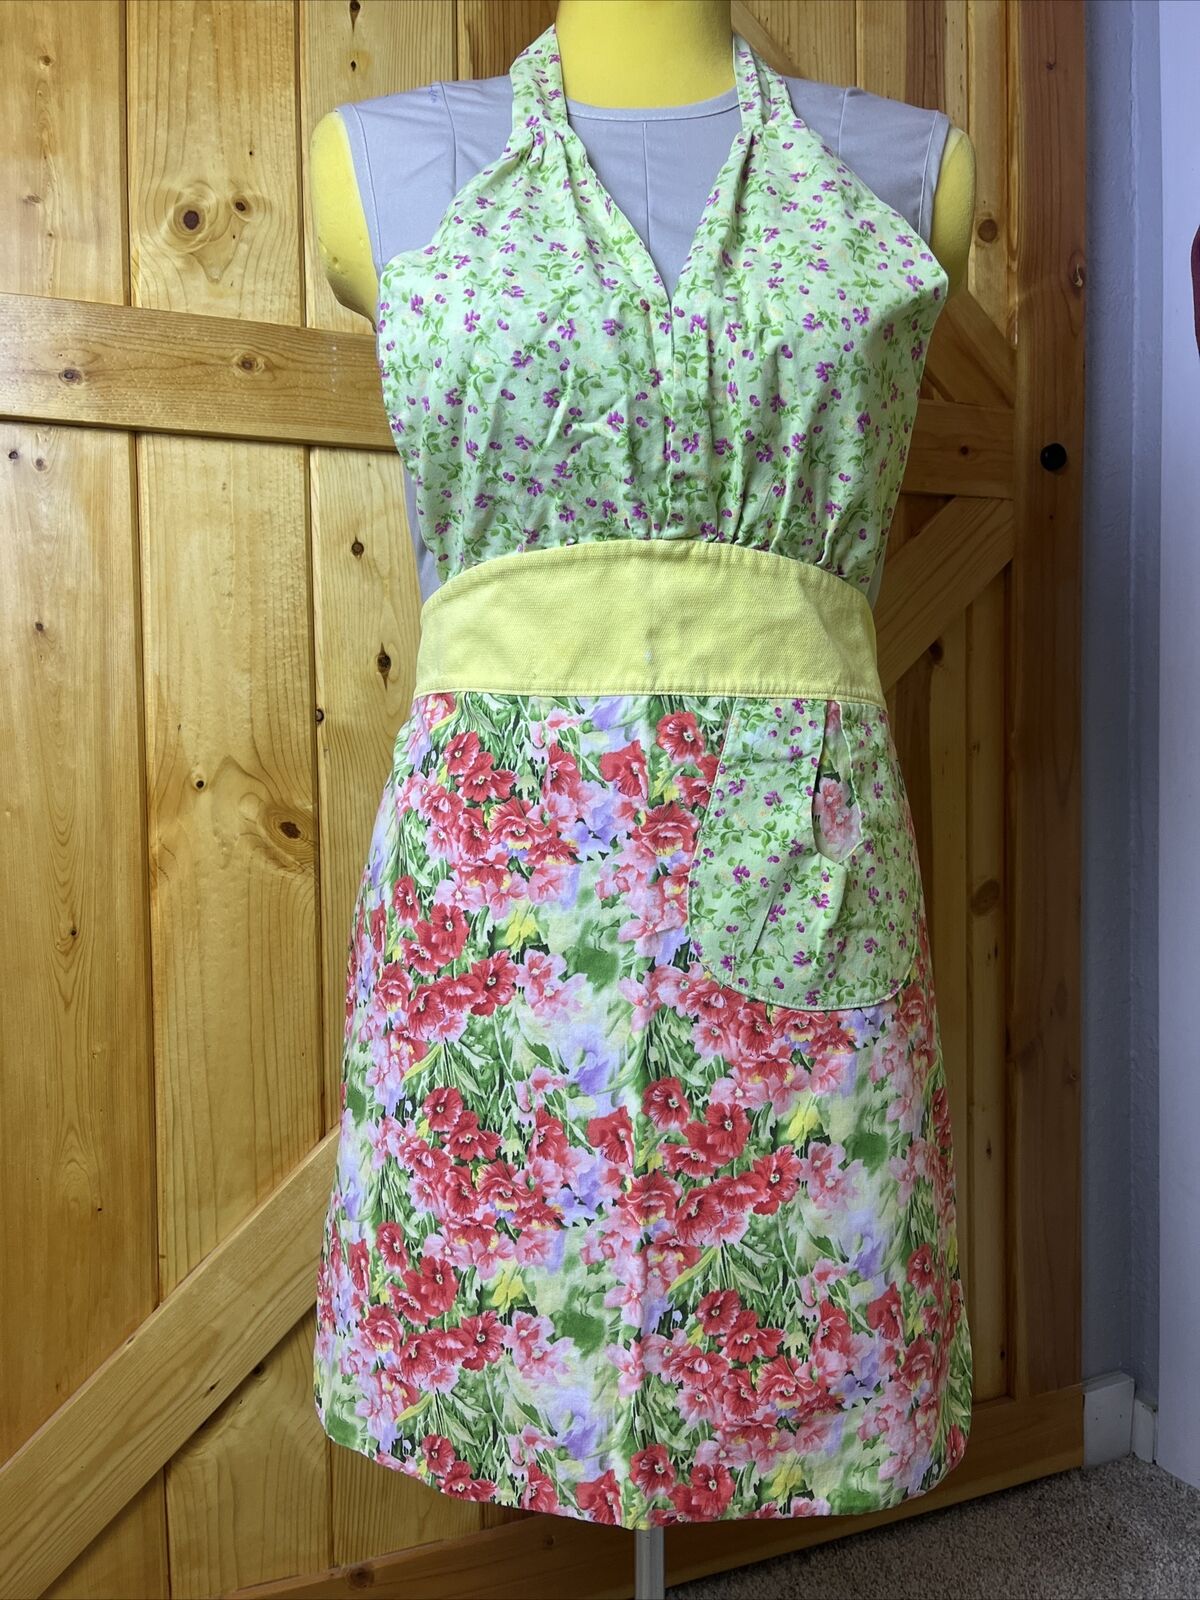 Halter Top ￼ Double ￼Sided, Apron w Pocket, Retro Style, Homemade By Peggy ￼